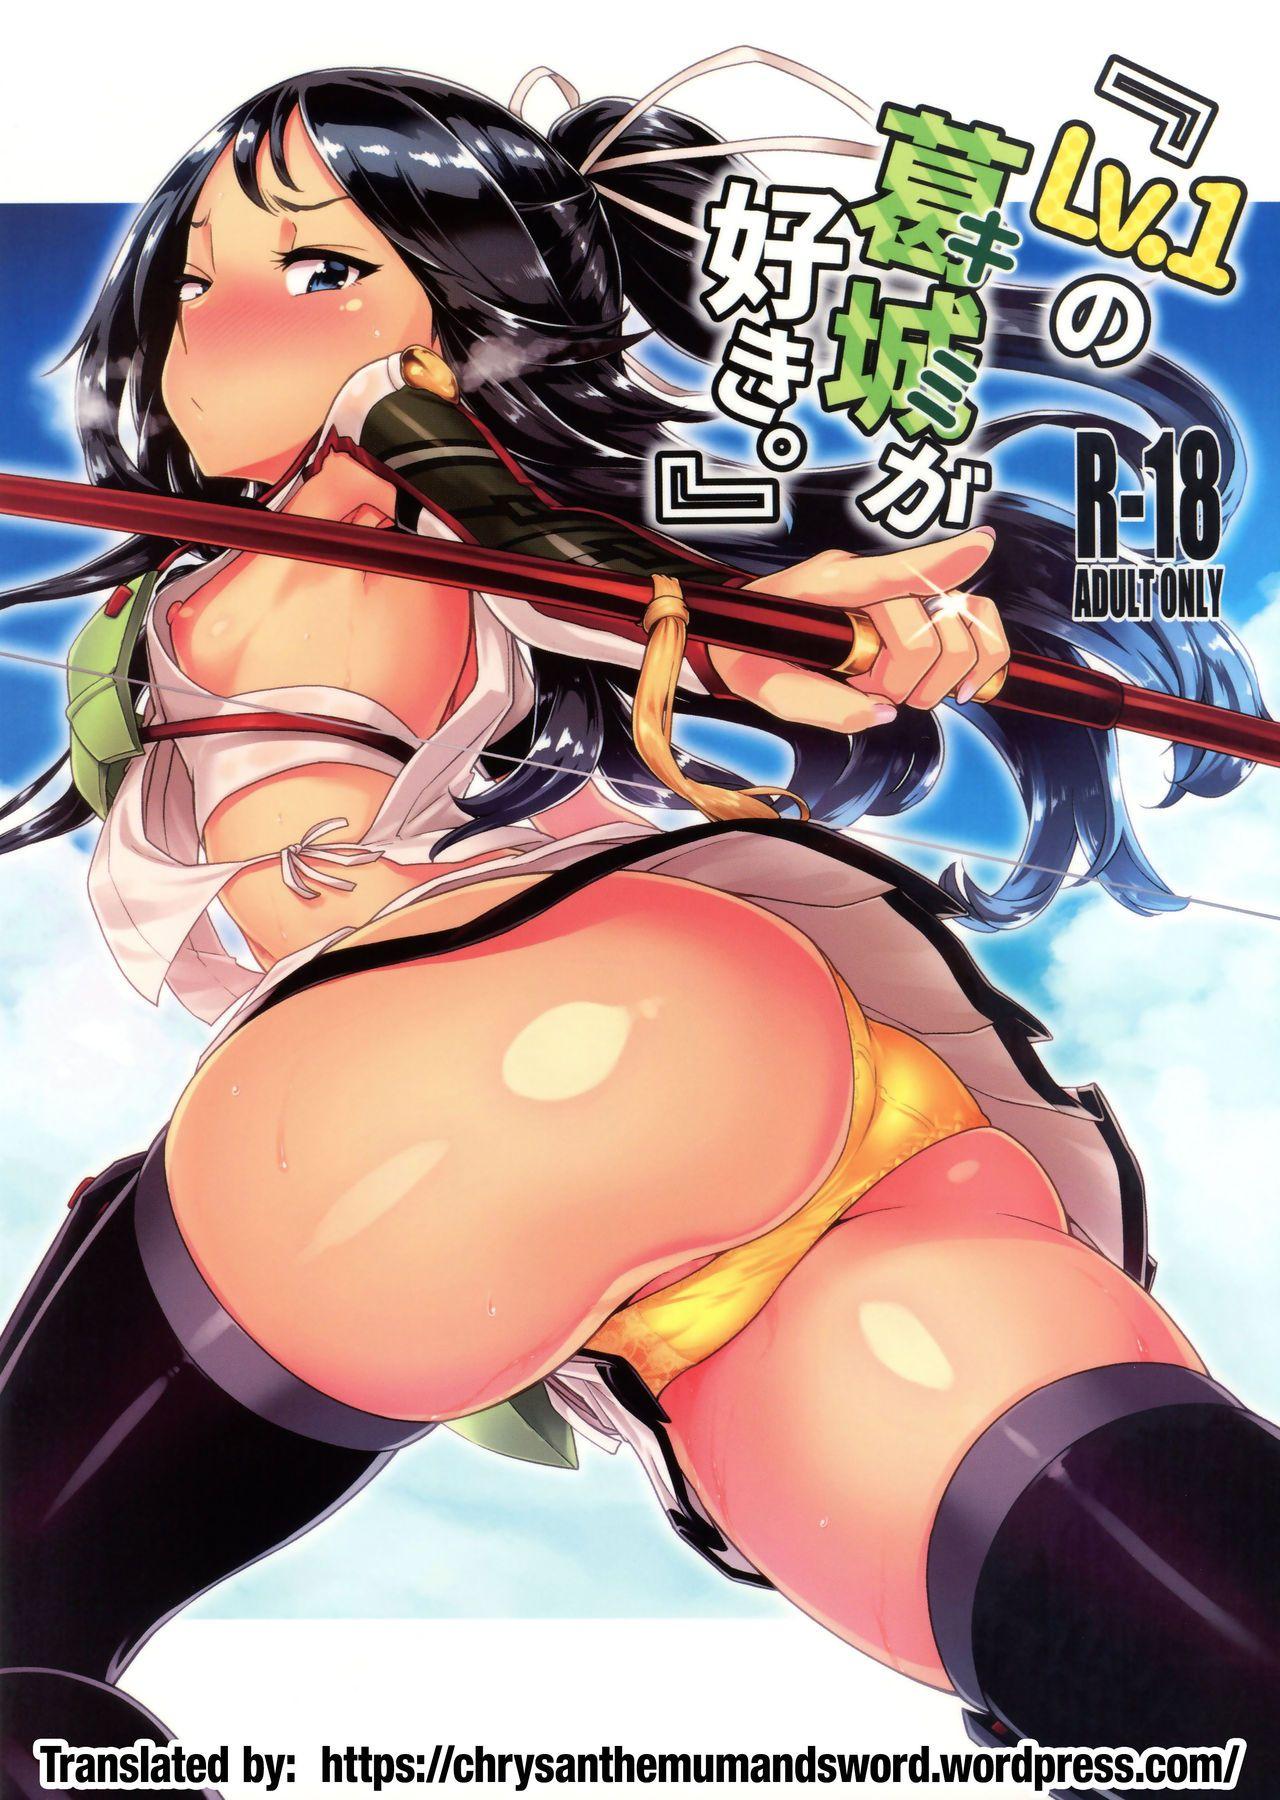 Harcore "Lv. 1 no Kimi ga Suki." | "I'd Love You Even If You Were Level One." - Kantai collection Femdom - Page 1